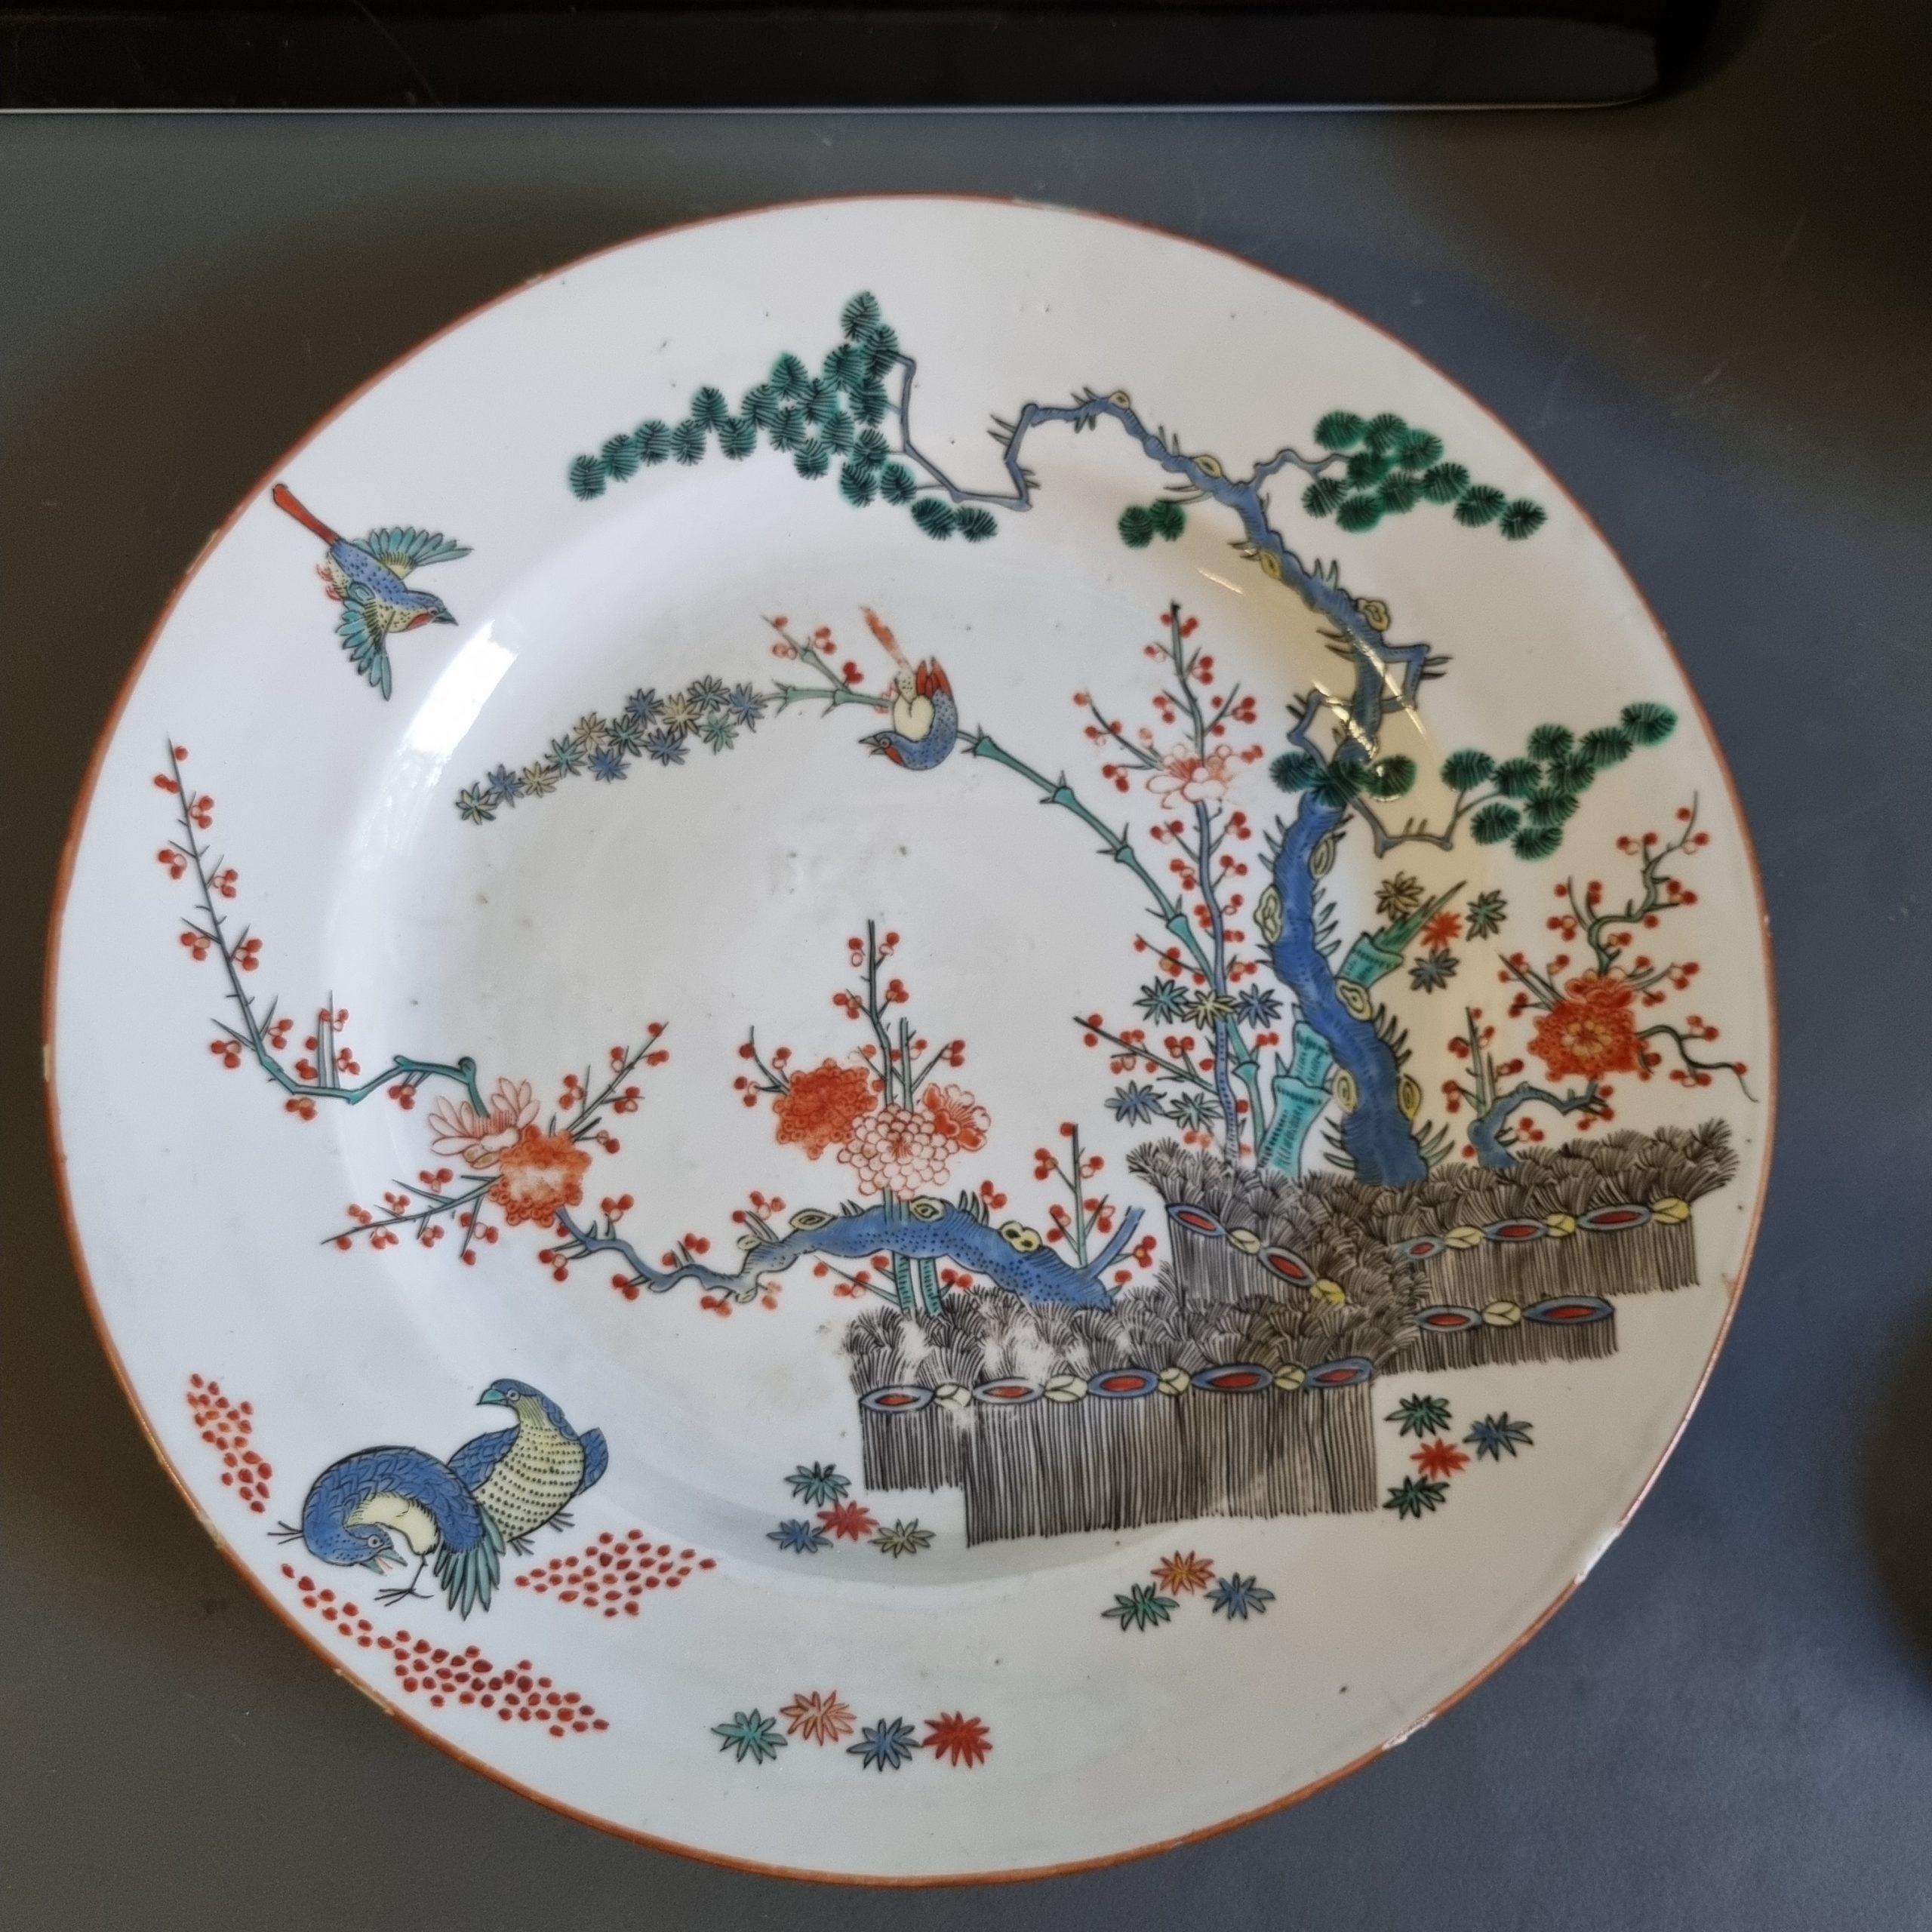 Qing High Quality 18 Century Kangxi Period Chinese Porcelain Kakiemon Plate Dutch For Sale